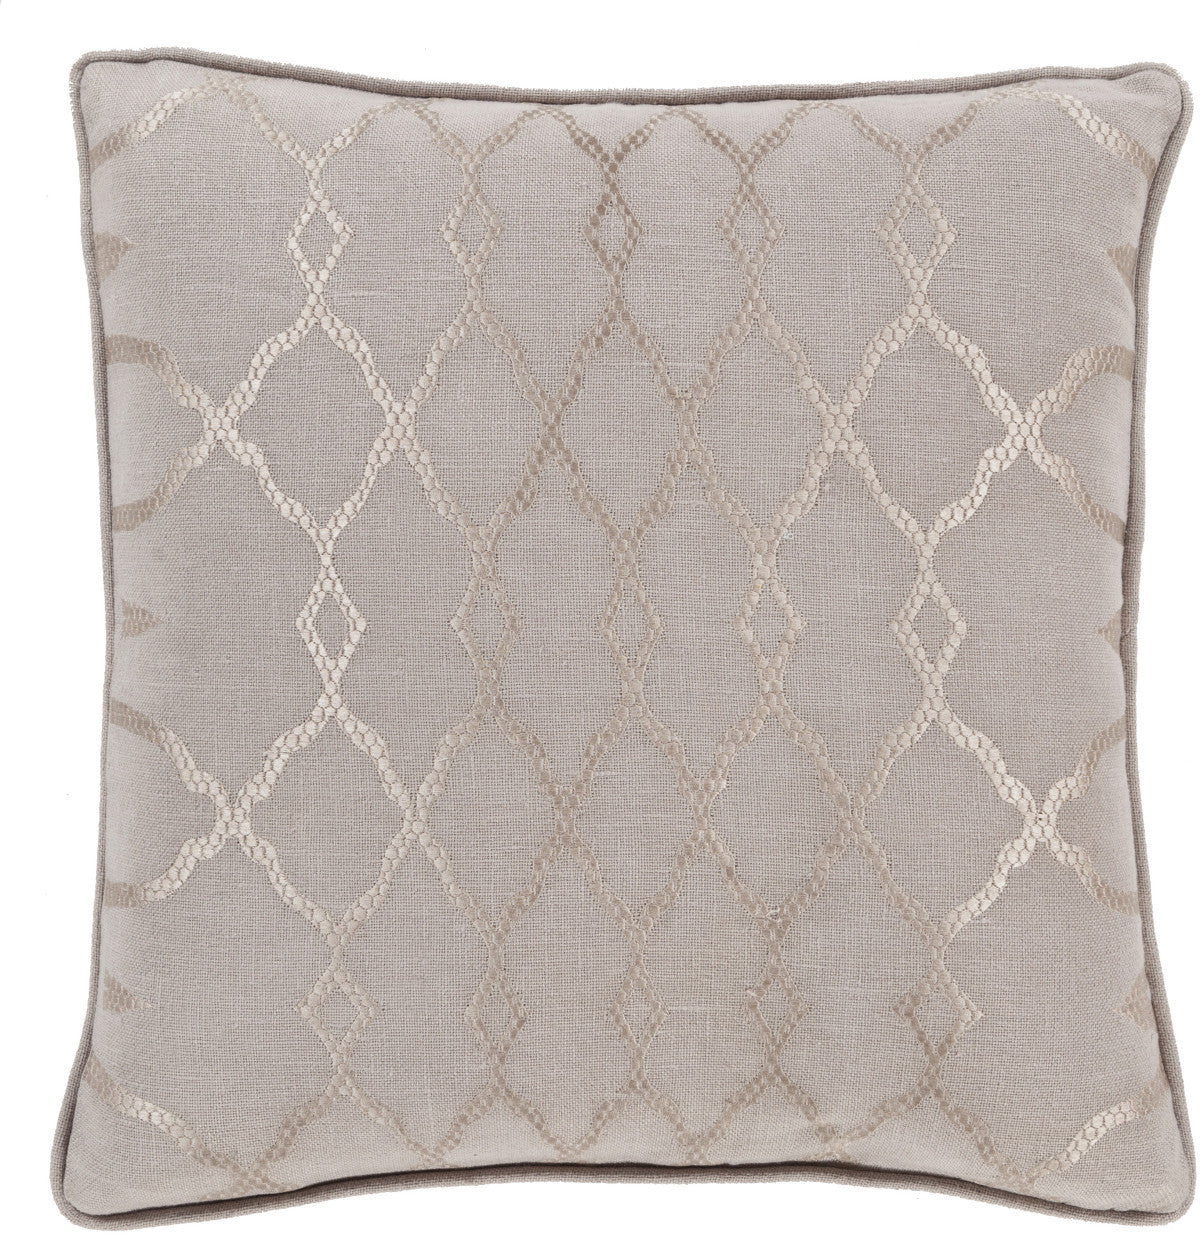 Surya Lydia Luxury in Linen LY-005 Pillow